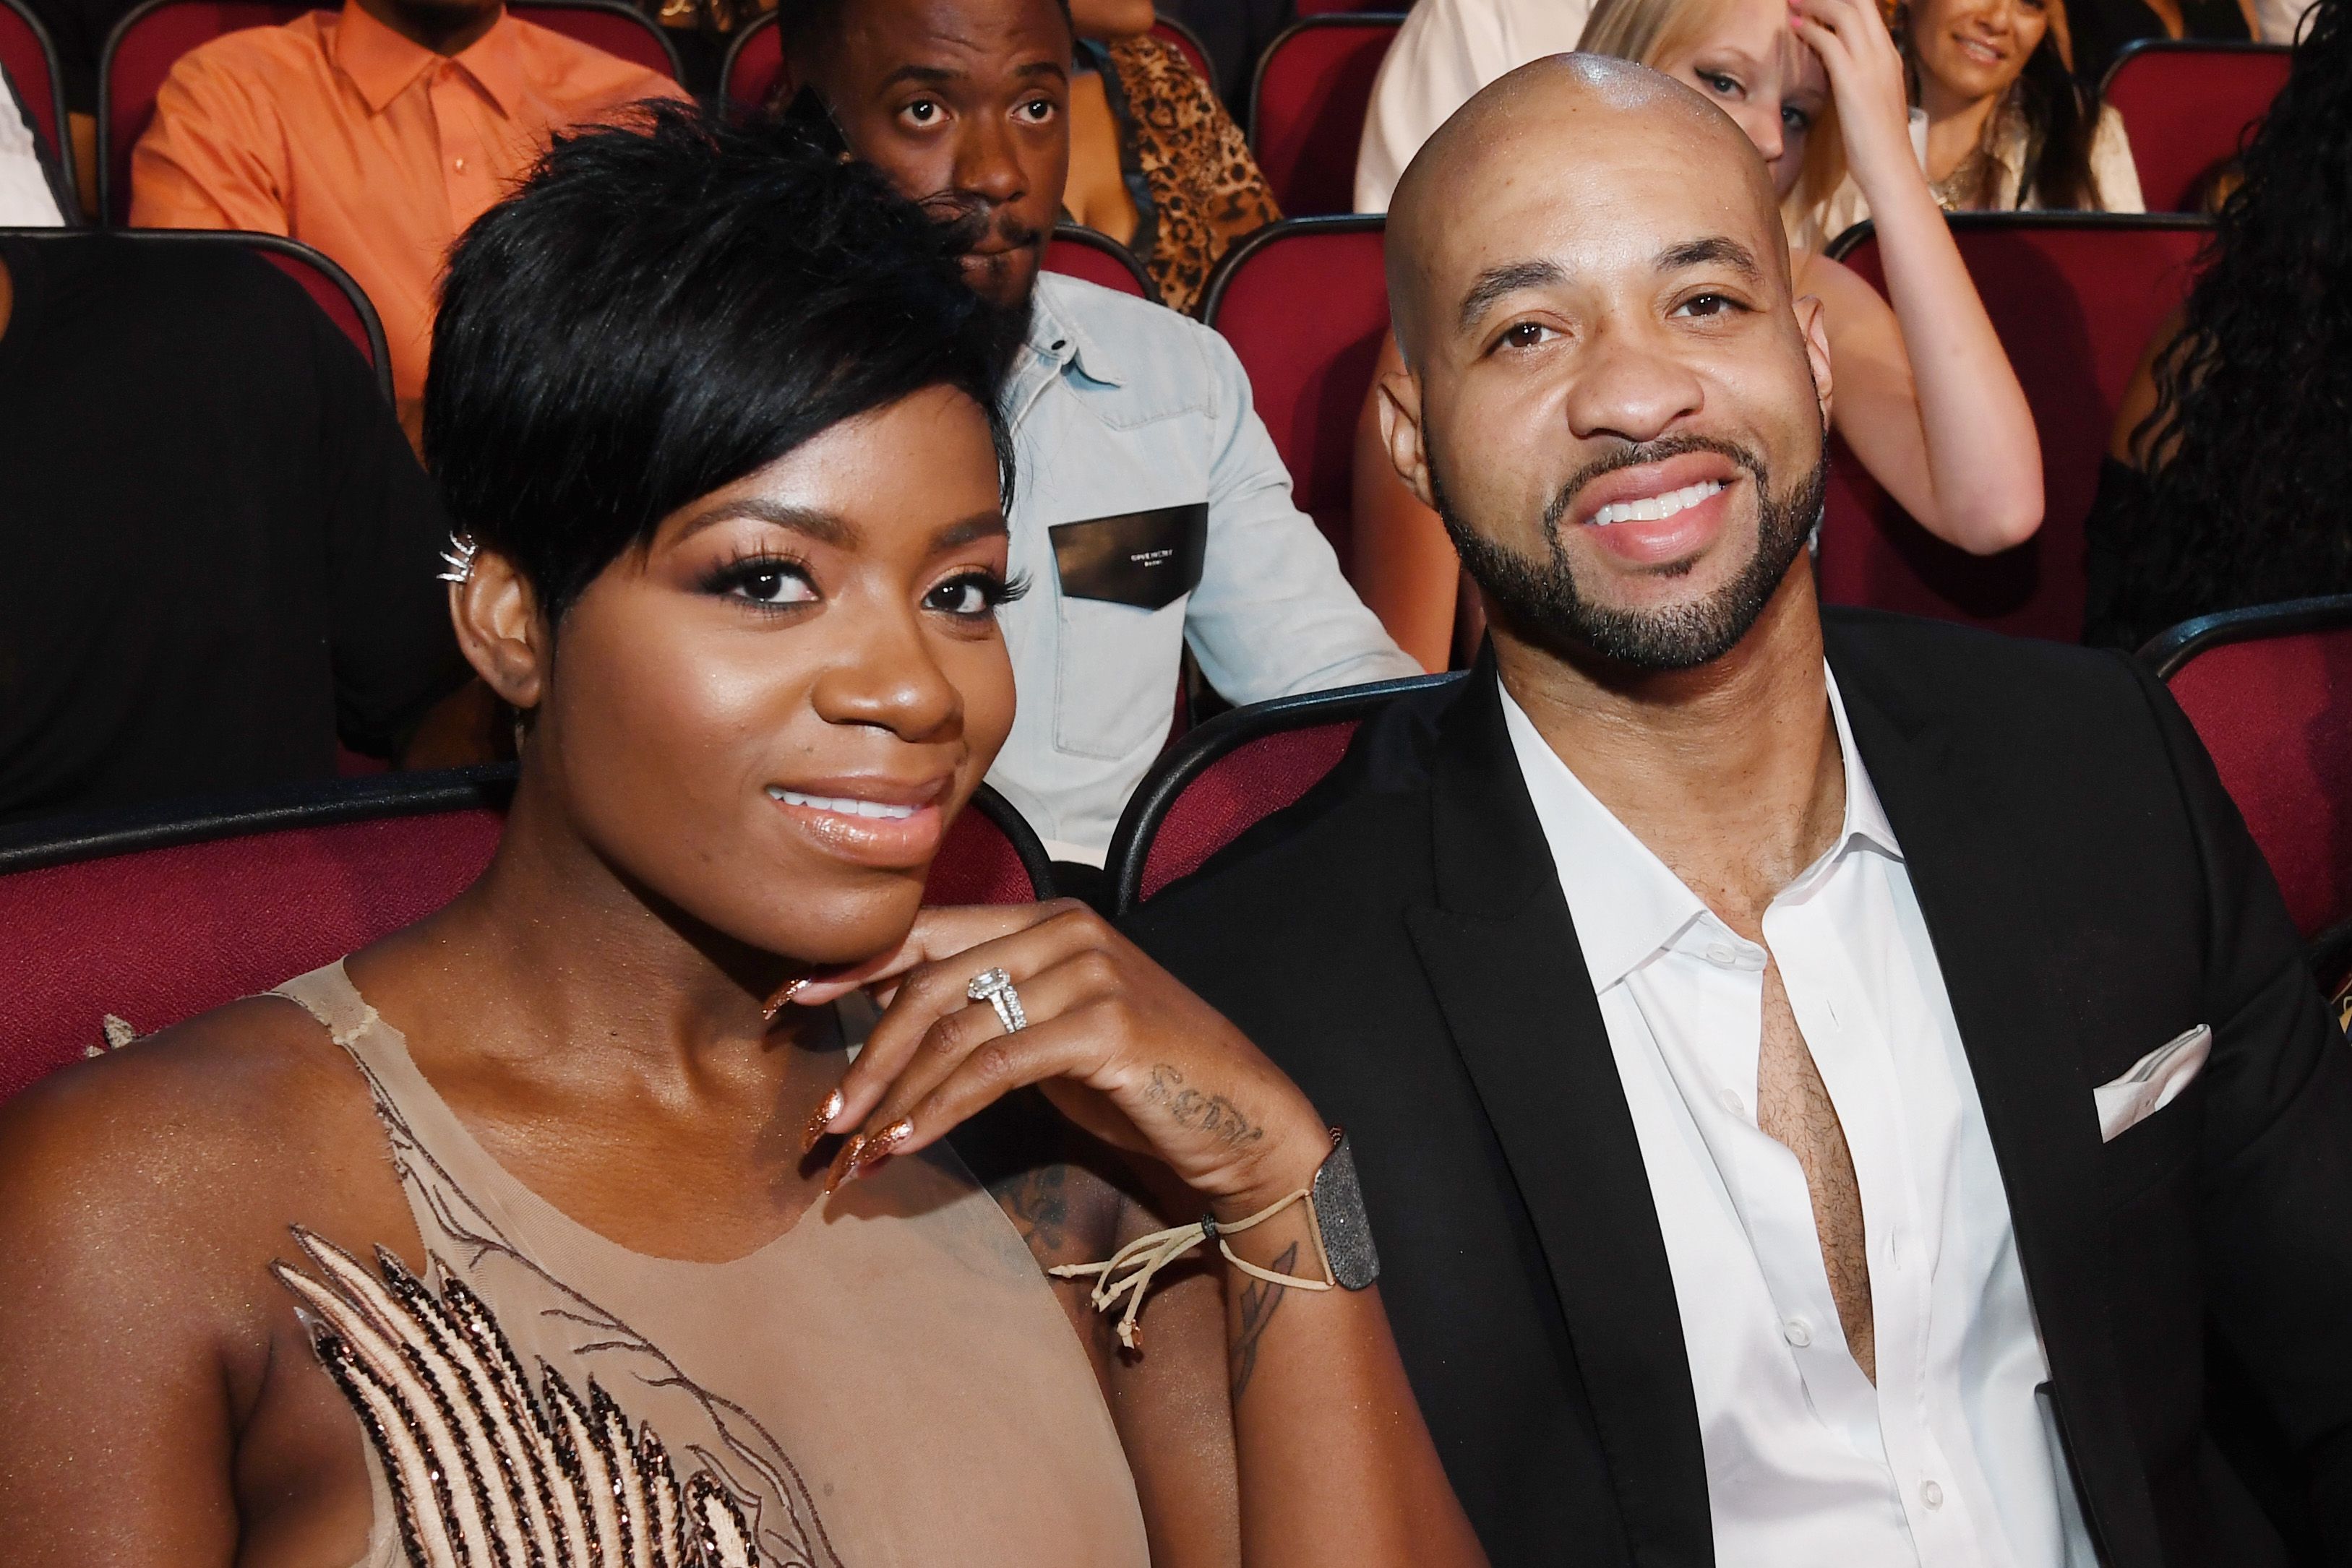 Singer Fantasia Barrino and her husband Kendall Taylor at the 2016 BET Awards at the Microsoft Theater on June 26, 2016 | Photo: Getty Images